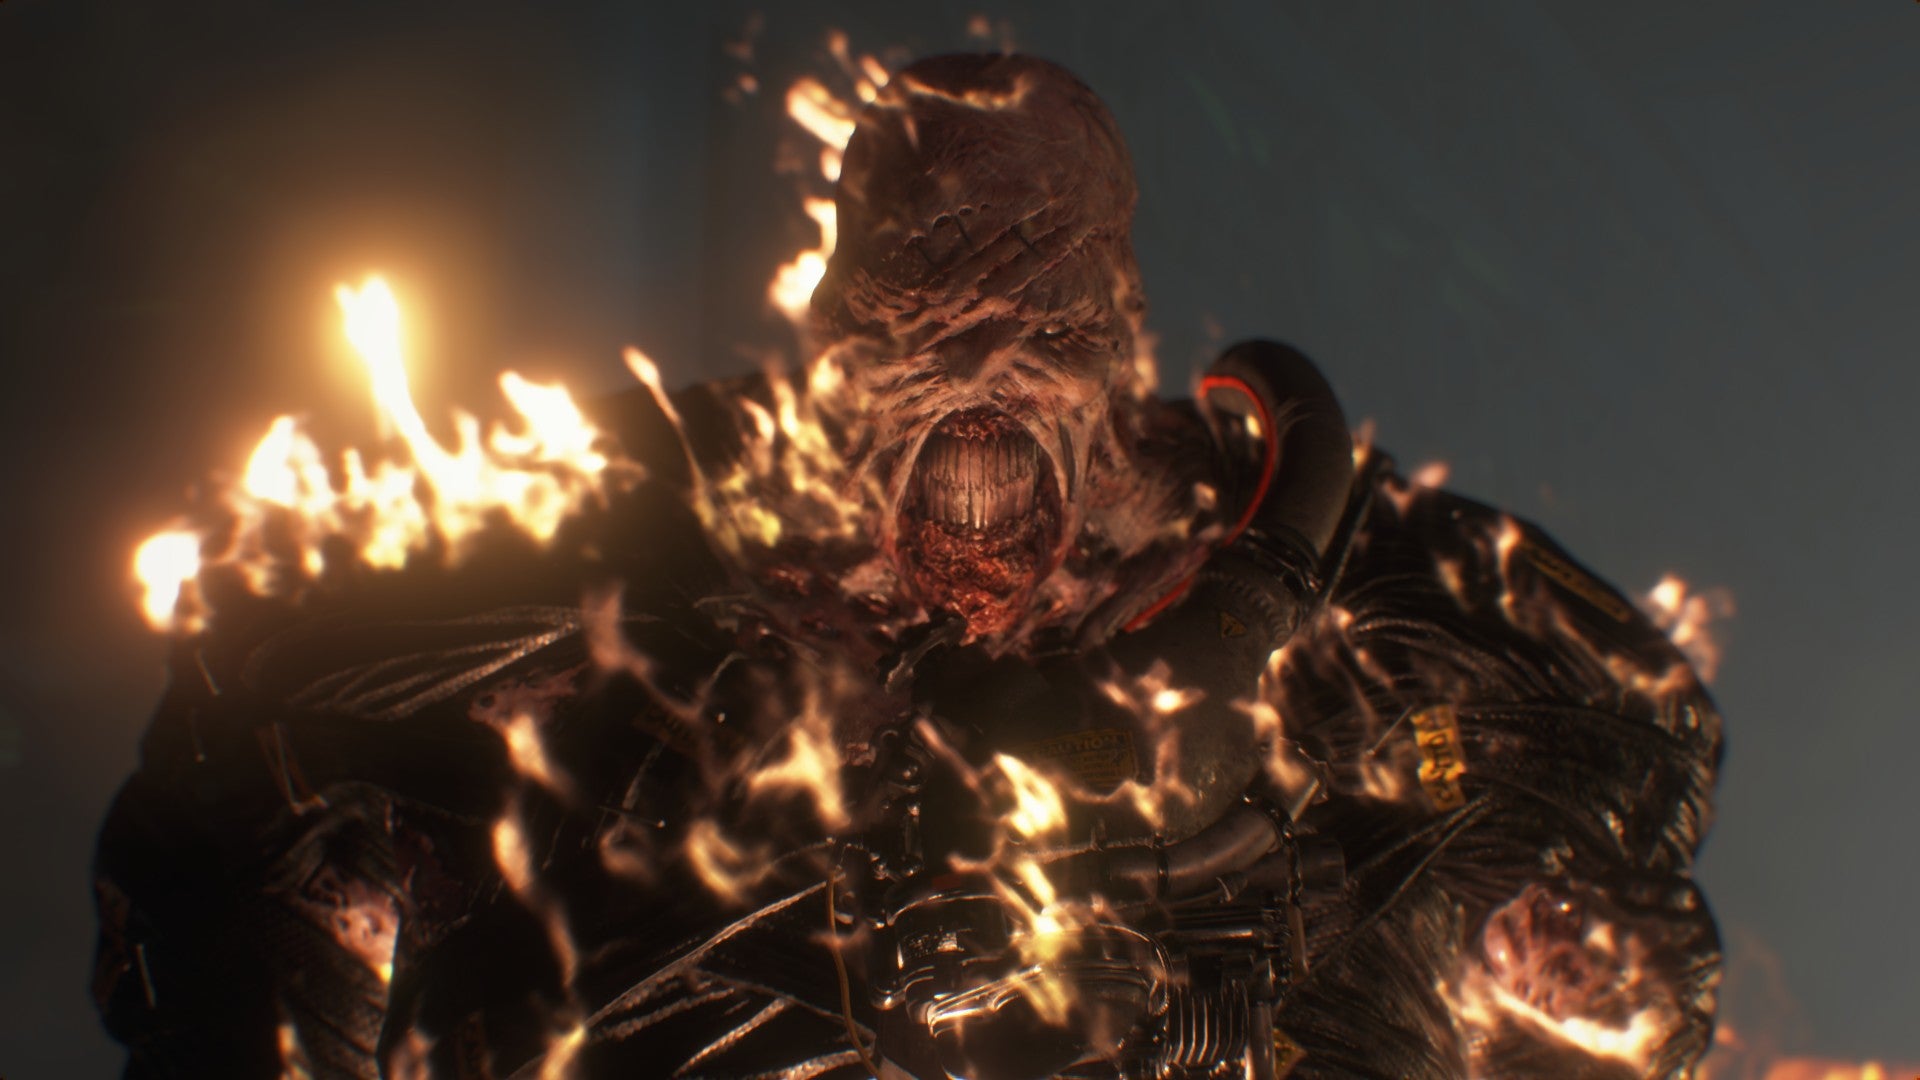 Image for Resident Evil 3 trailer gives us a look at Nemesis and additional key characters